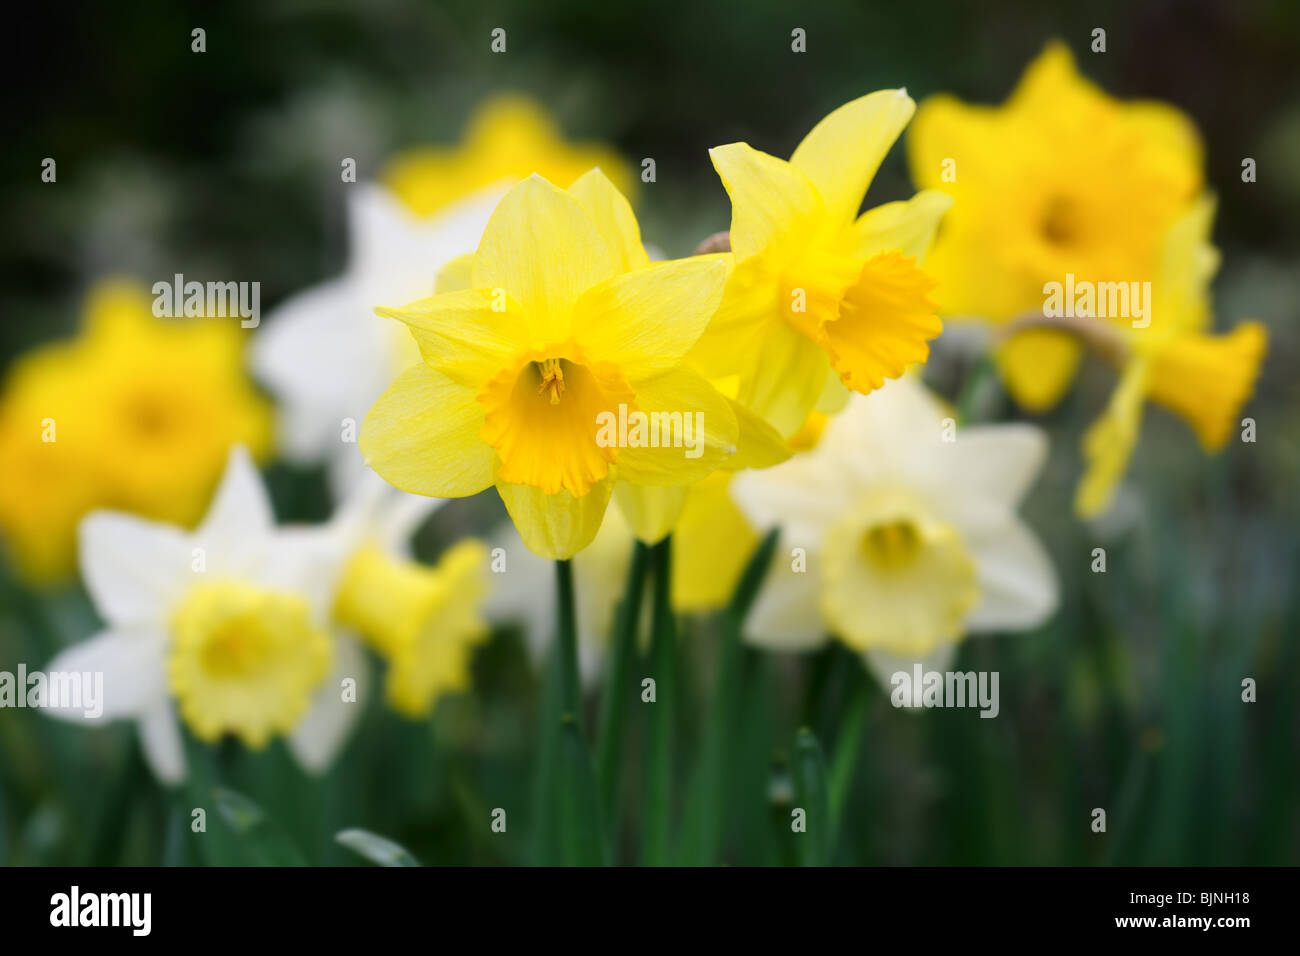 A variety of yellow and white trumpet daffodils, with selective focus on the front flower Stock Photo